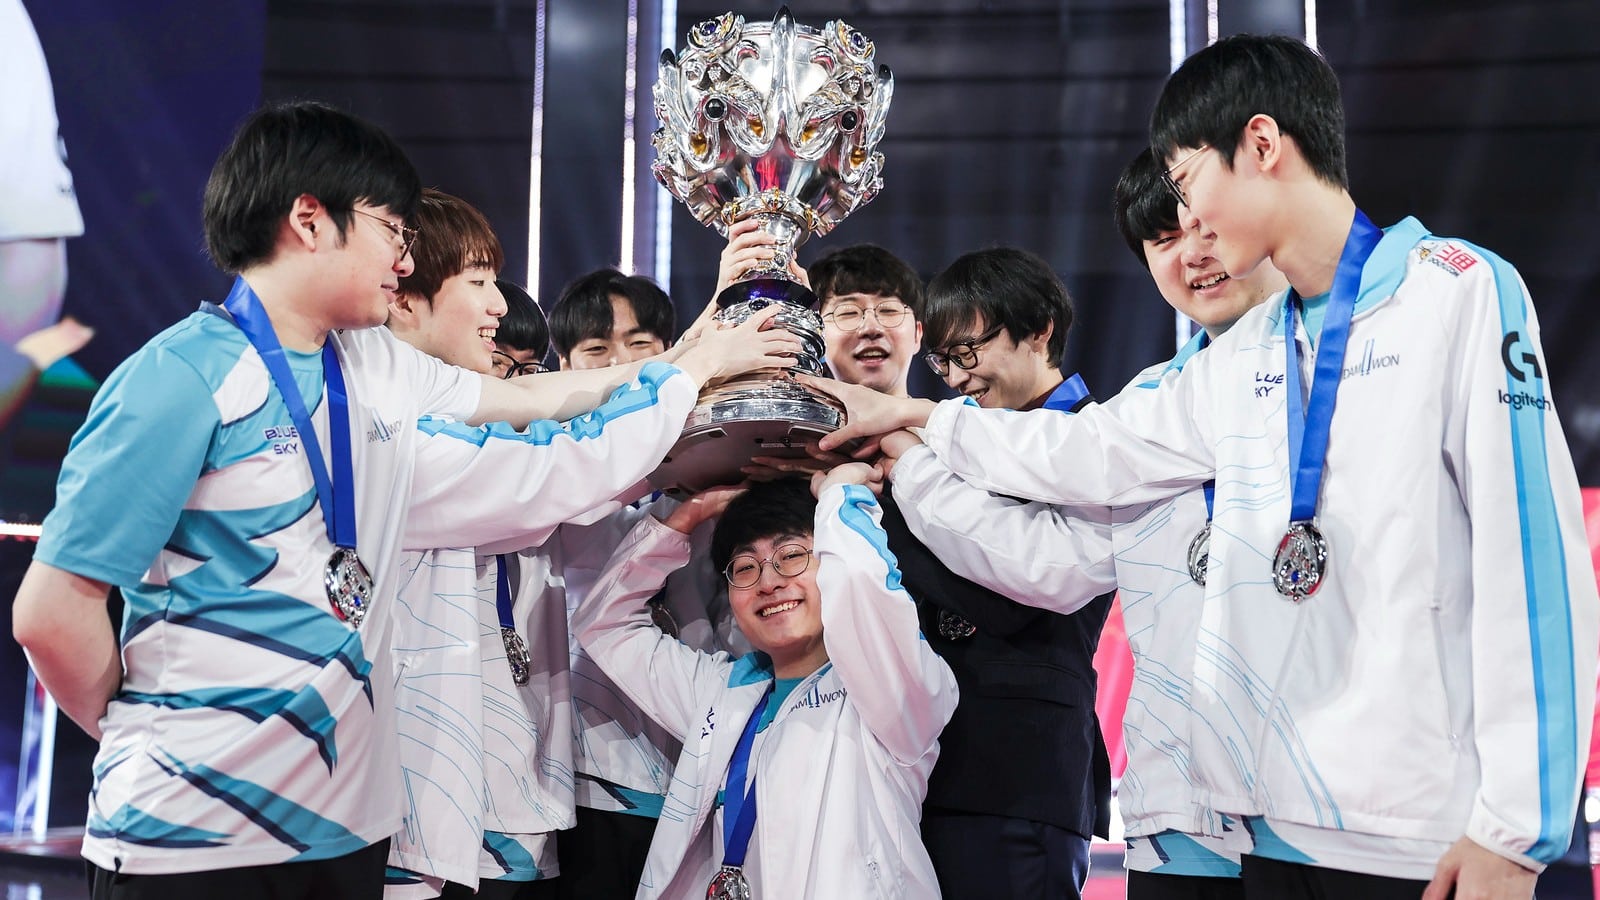 DWG lifts the trophy at Worlds 2020